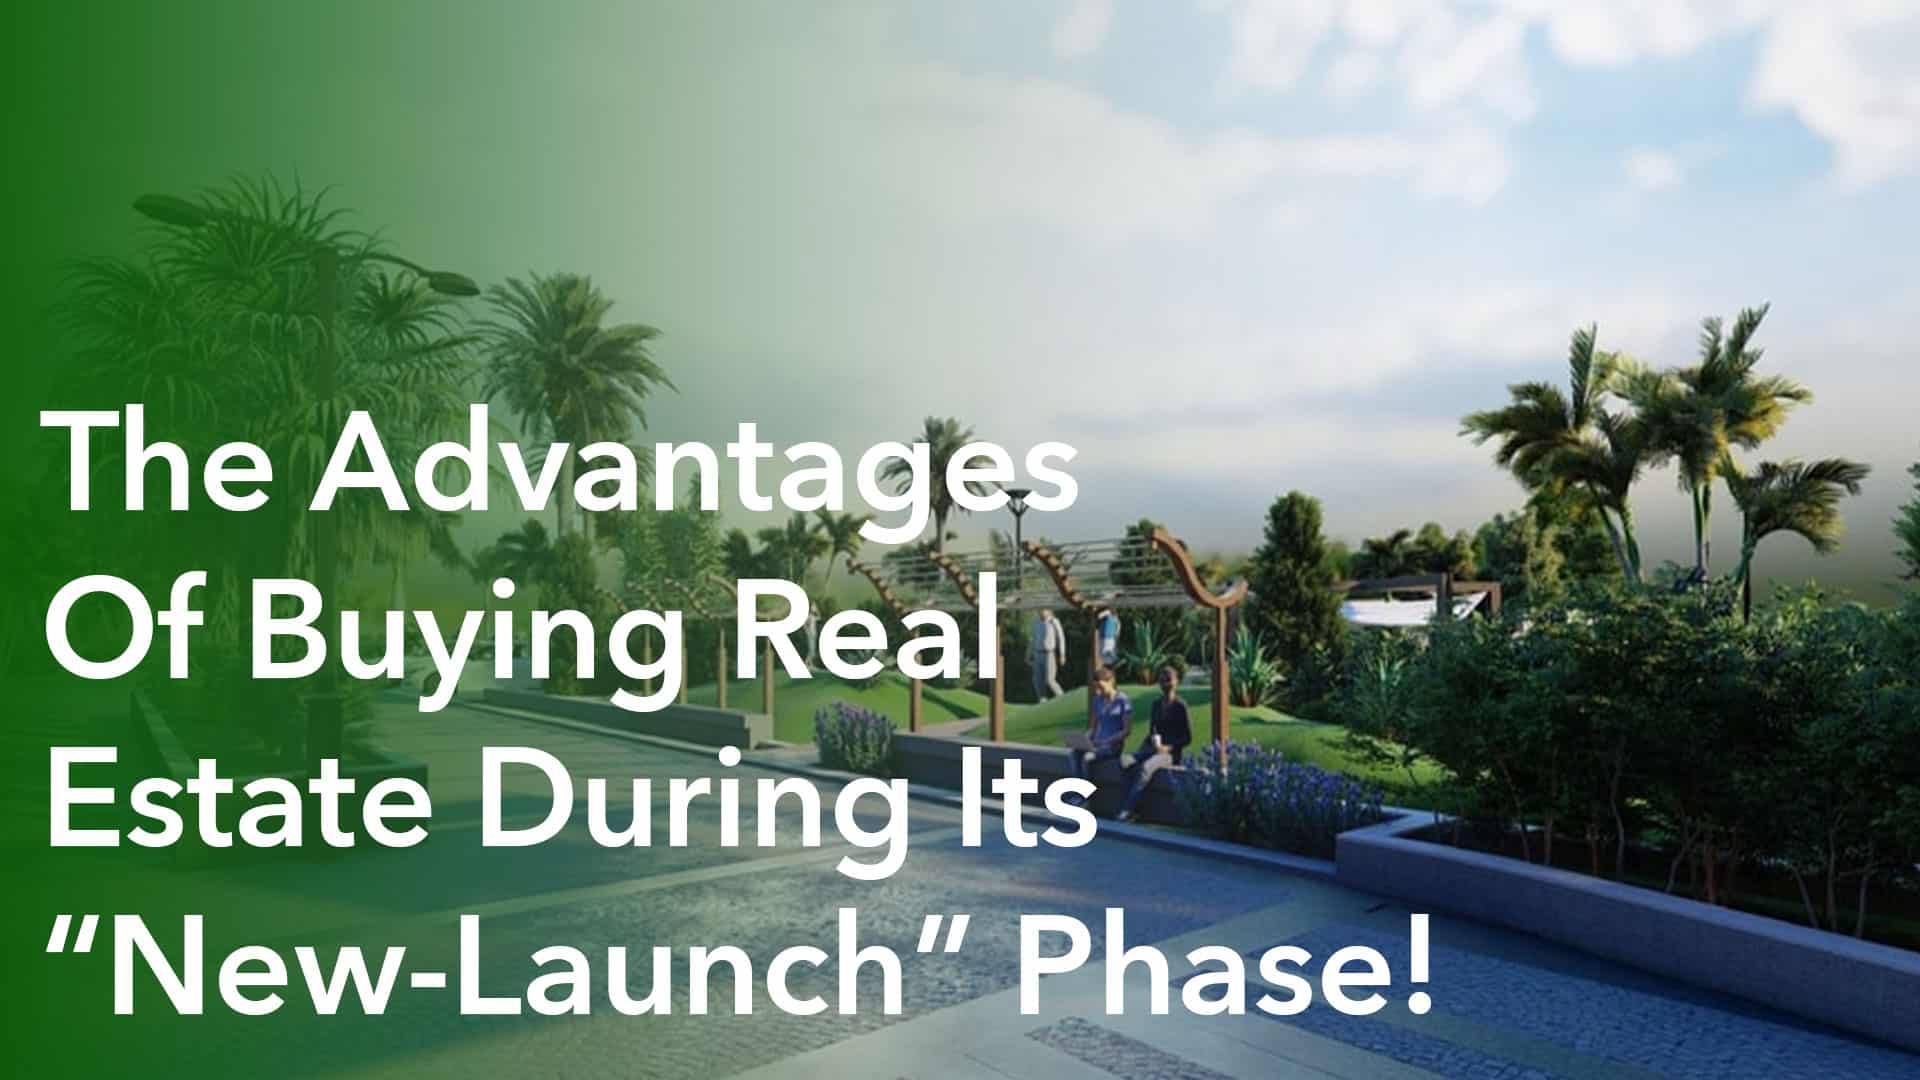 Buy Real Estate During Its “New-Launch” Phase